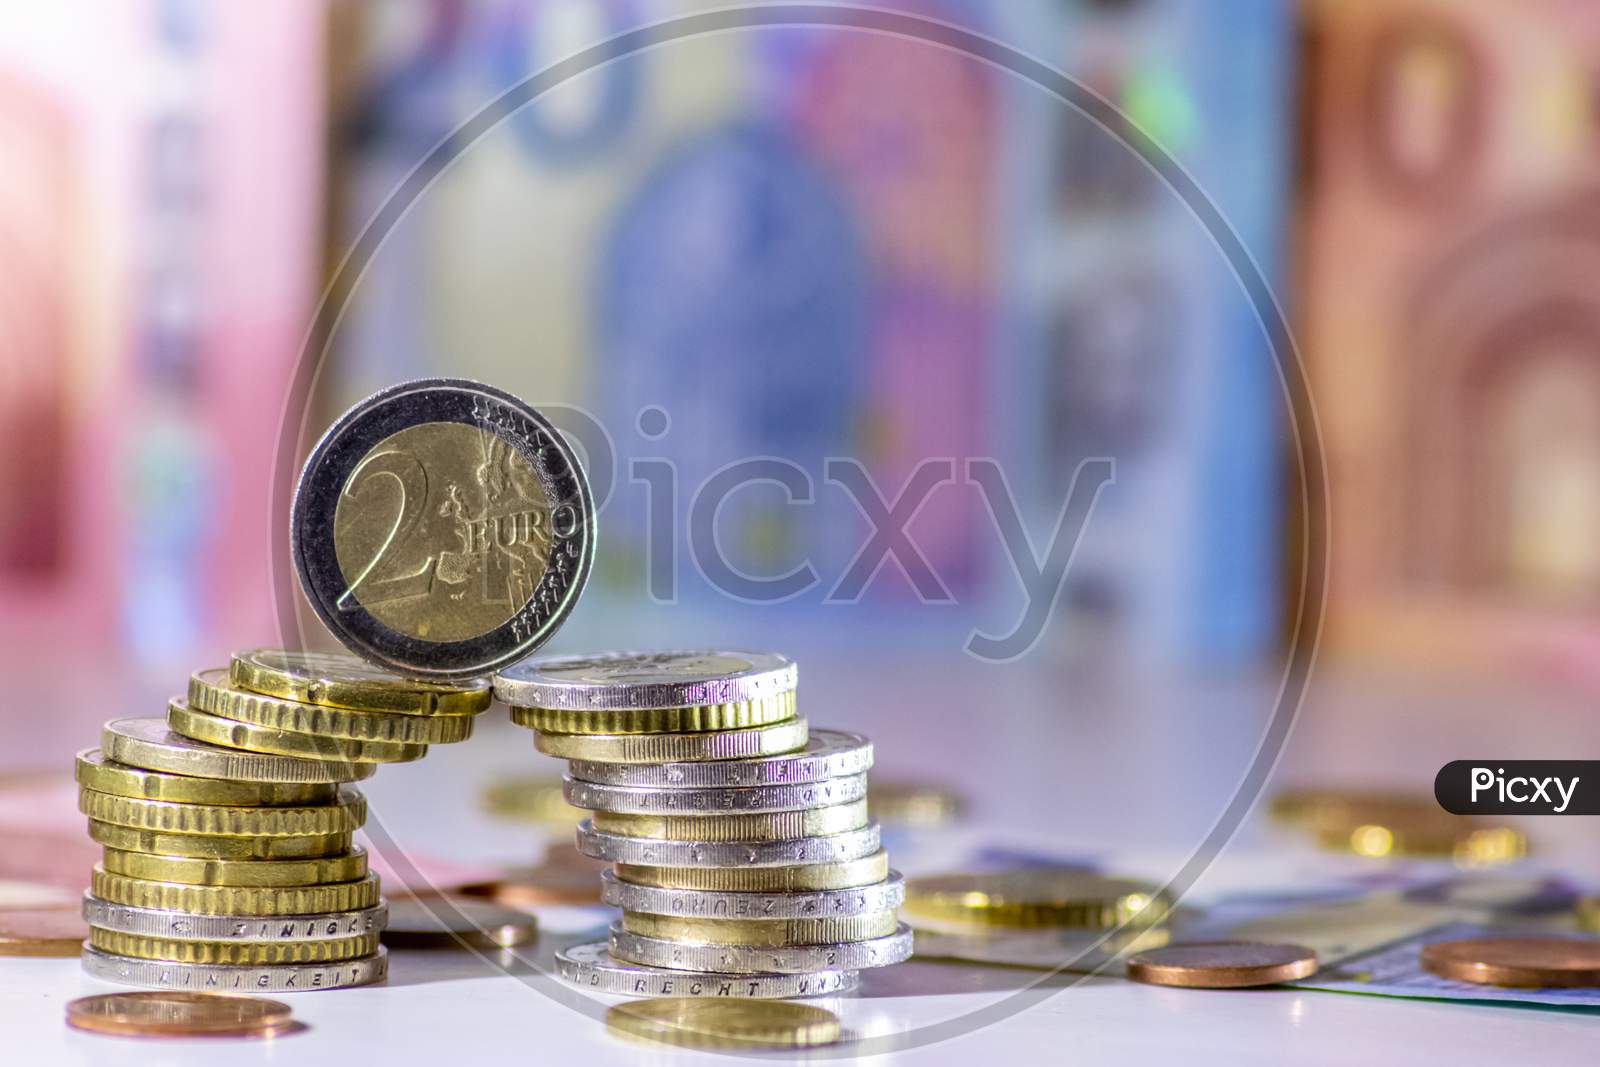 Bunch of european money with coins and bank notes show international finance with euro and europe, financial trade with a 2 euro coin and different euro coins and euro bank notes for financial success